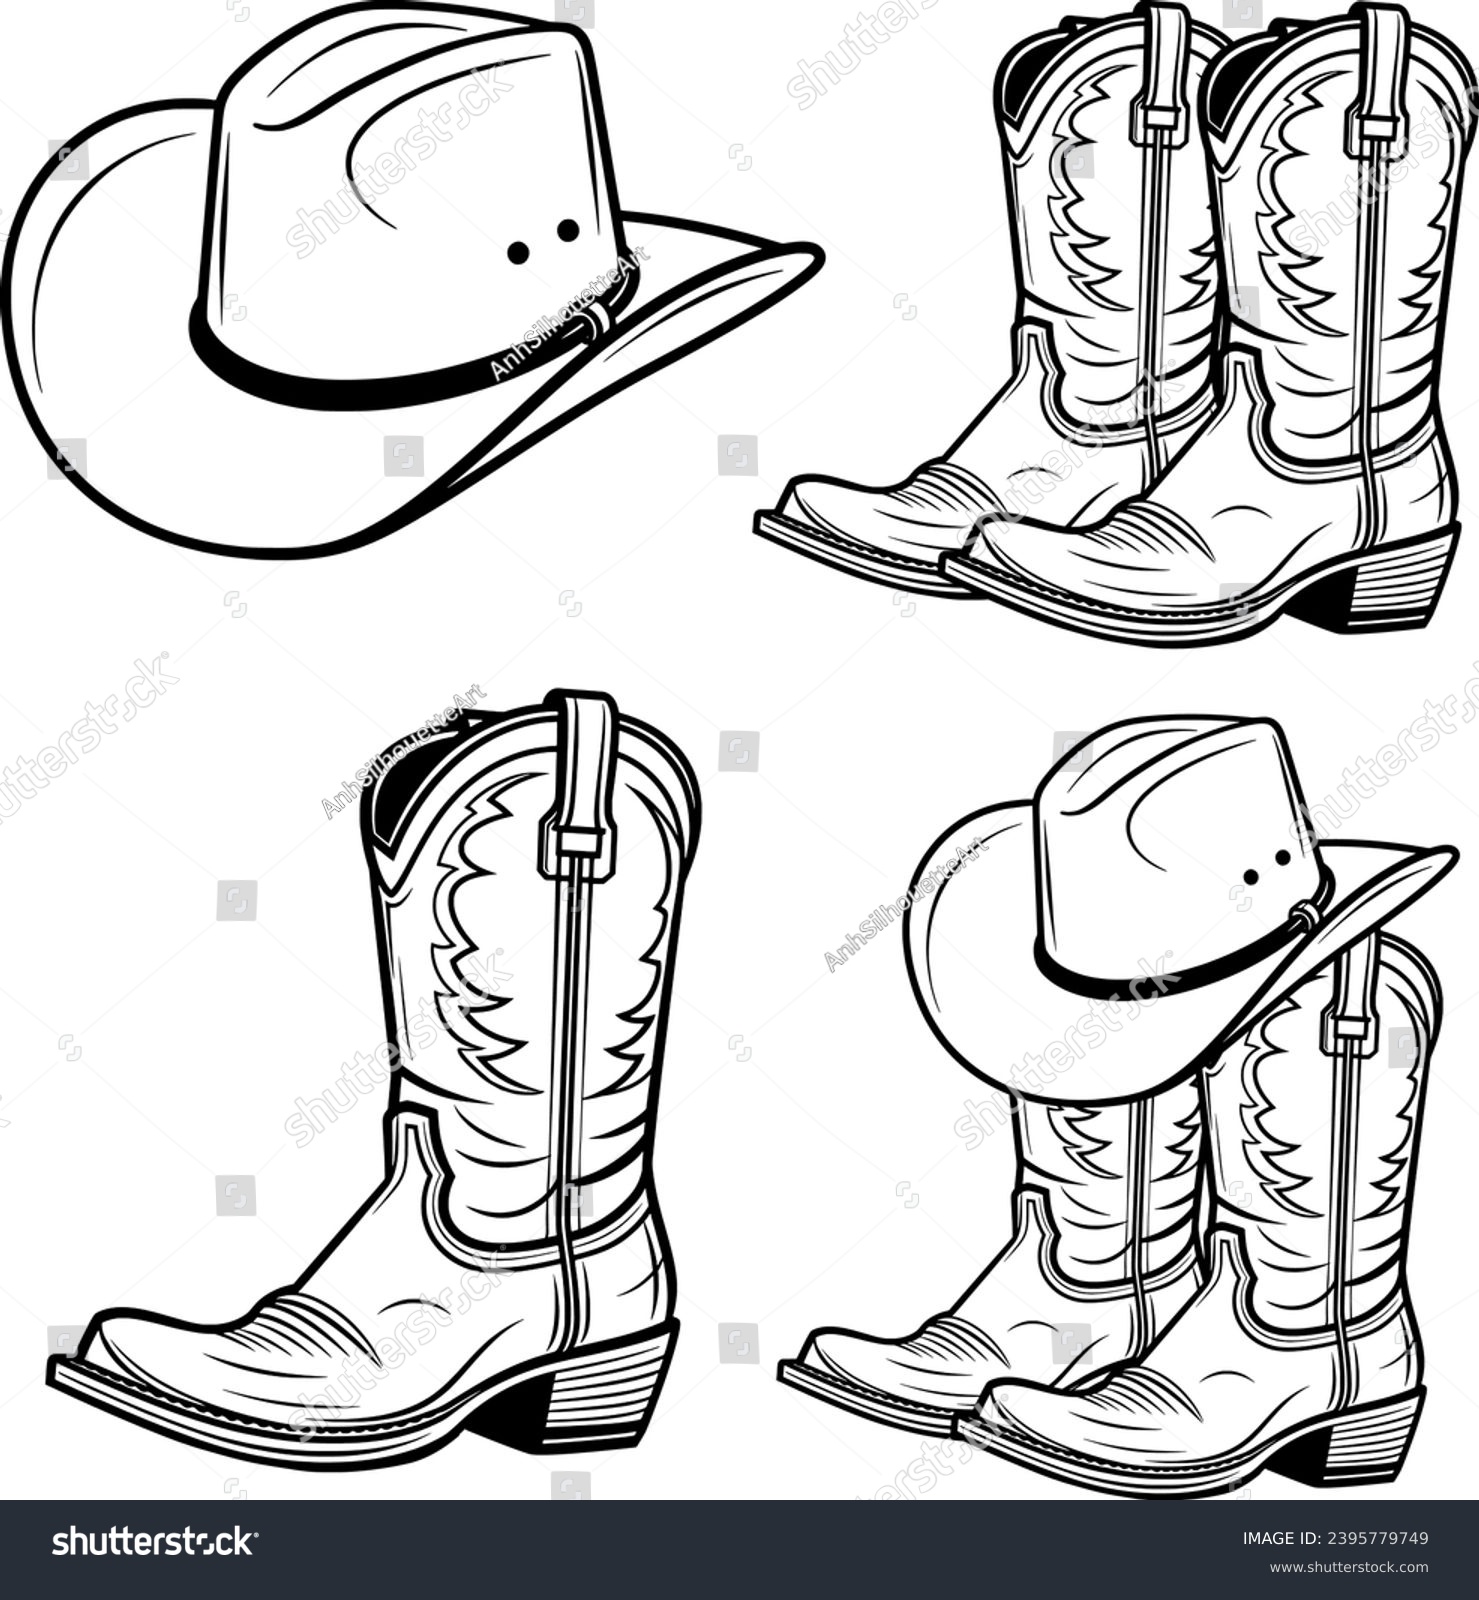 SVG of Cowboy Boots Bundle, Cowboy Boots Hand-Drawn, Rodeo, Ranch, Cowboy Hat, Western Boots, Boots Silhouette svg